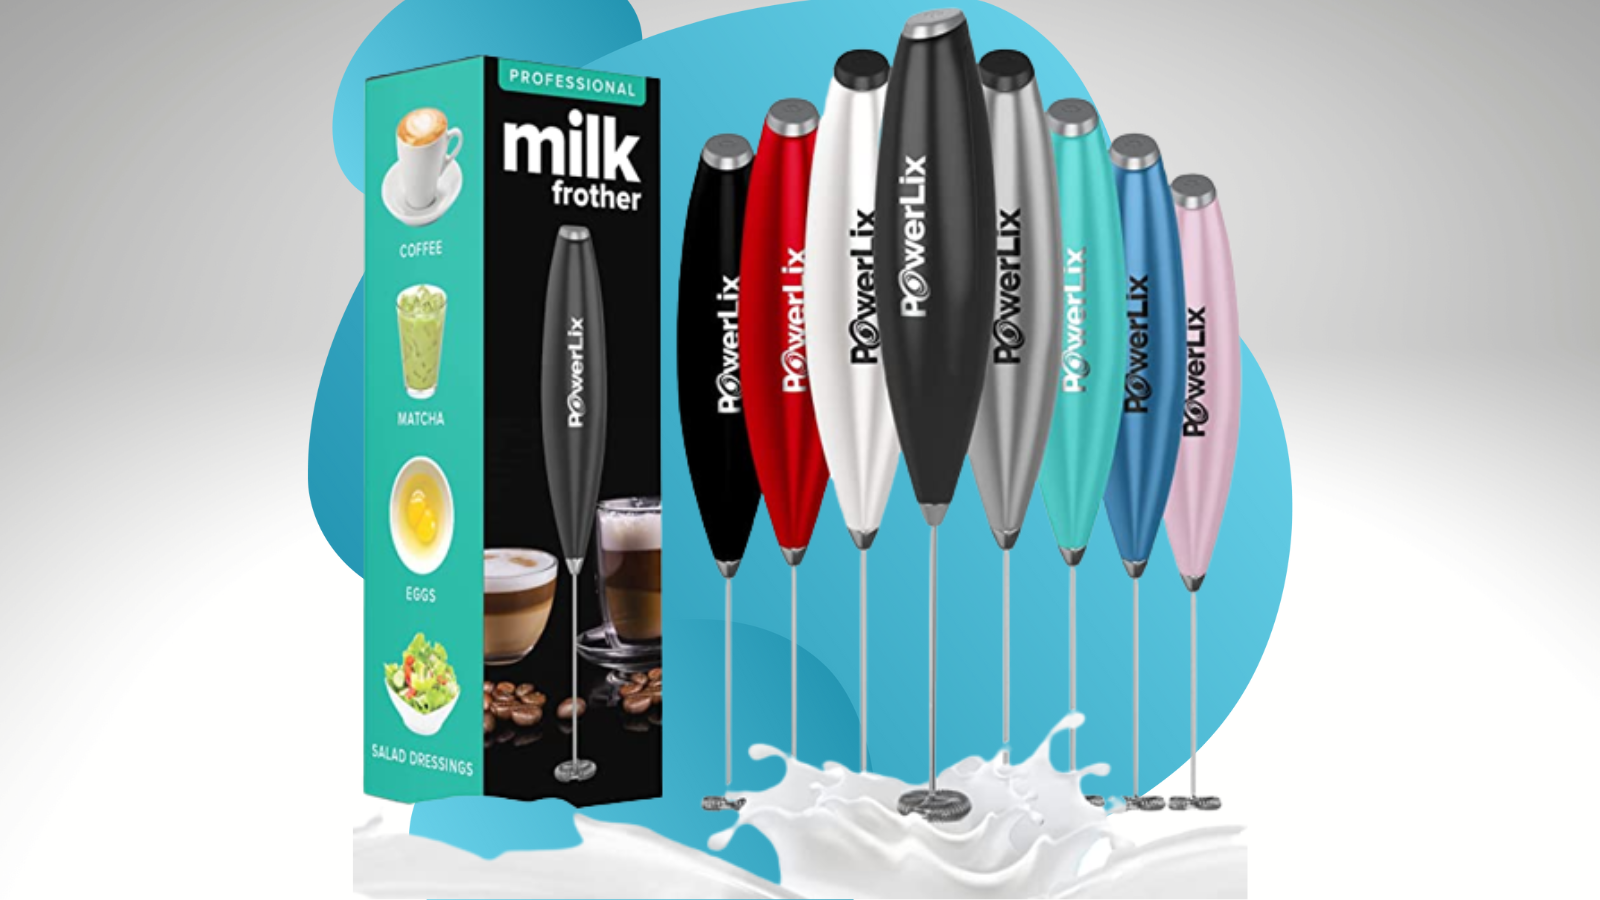 powerlix milk frothers in a variety of colors with gray and blue background